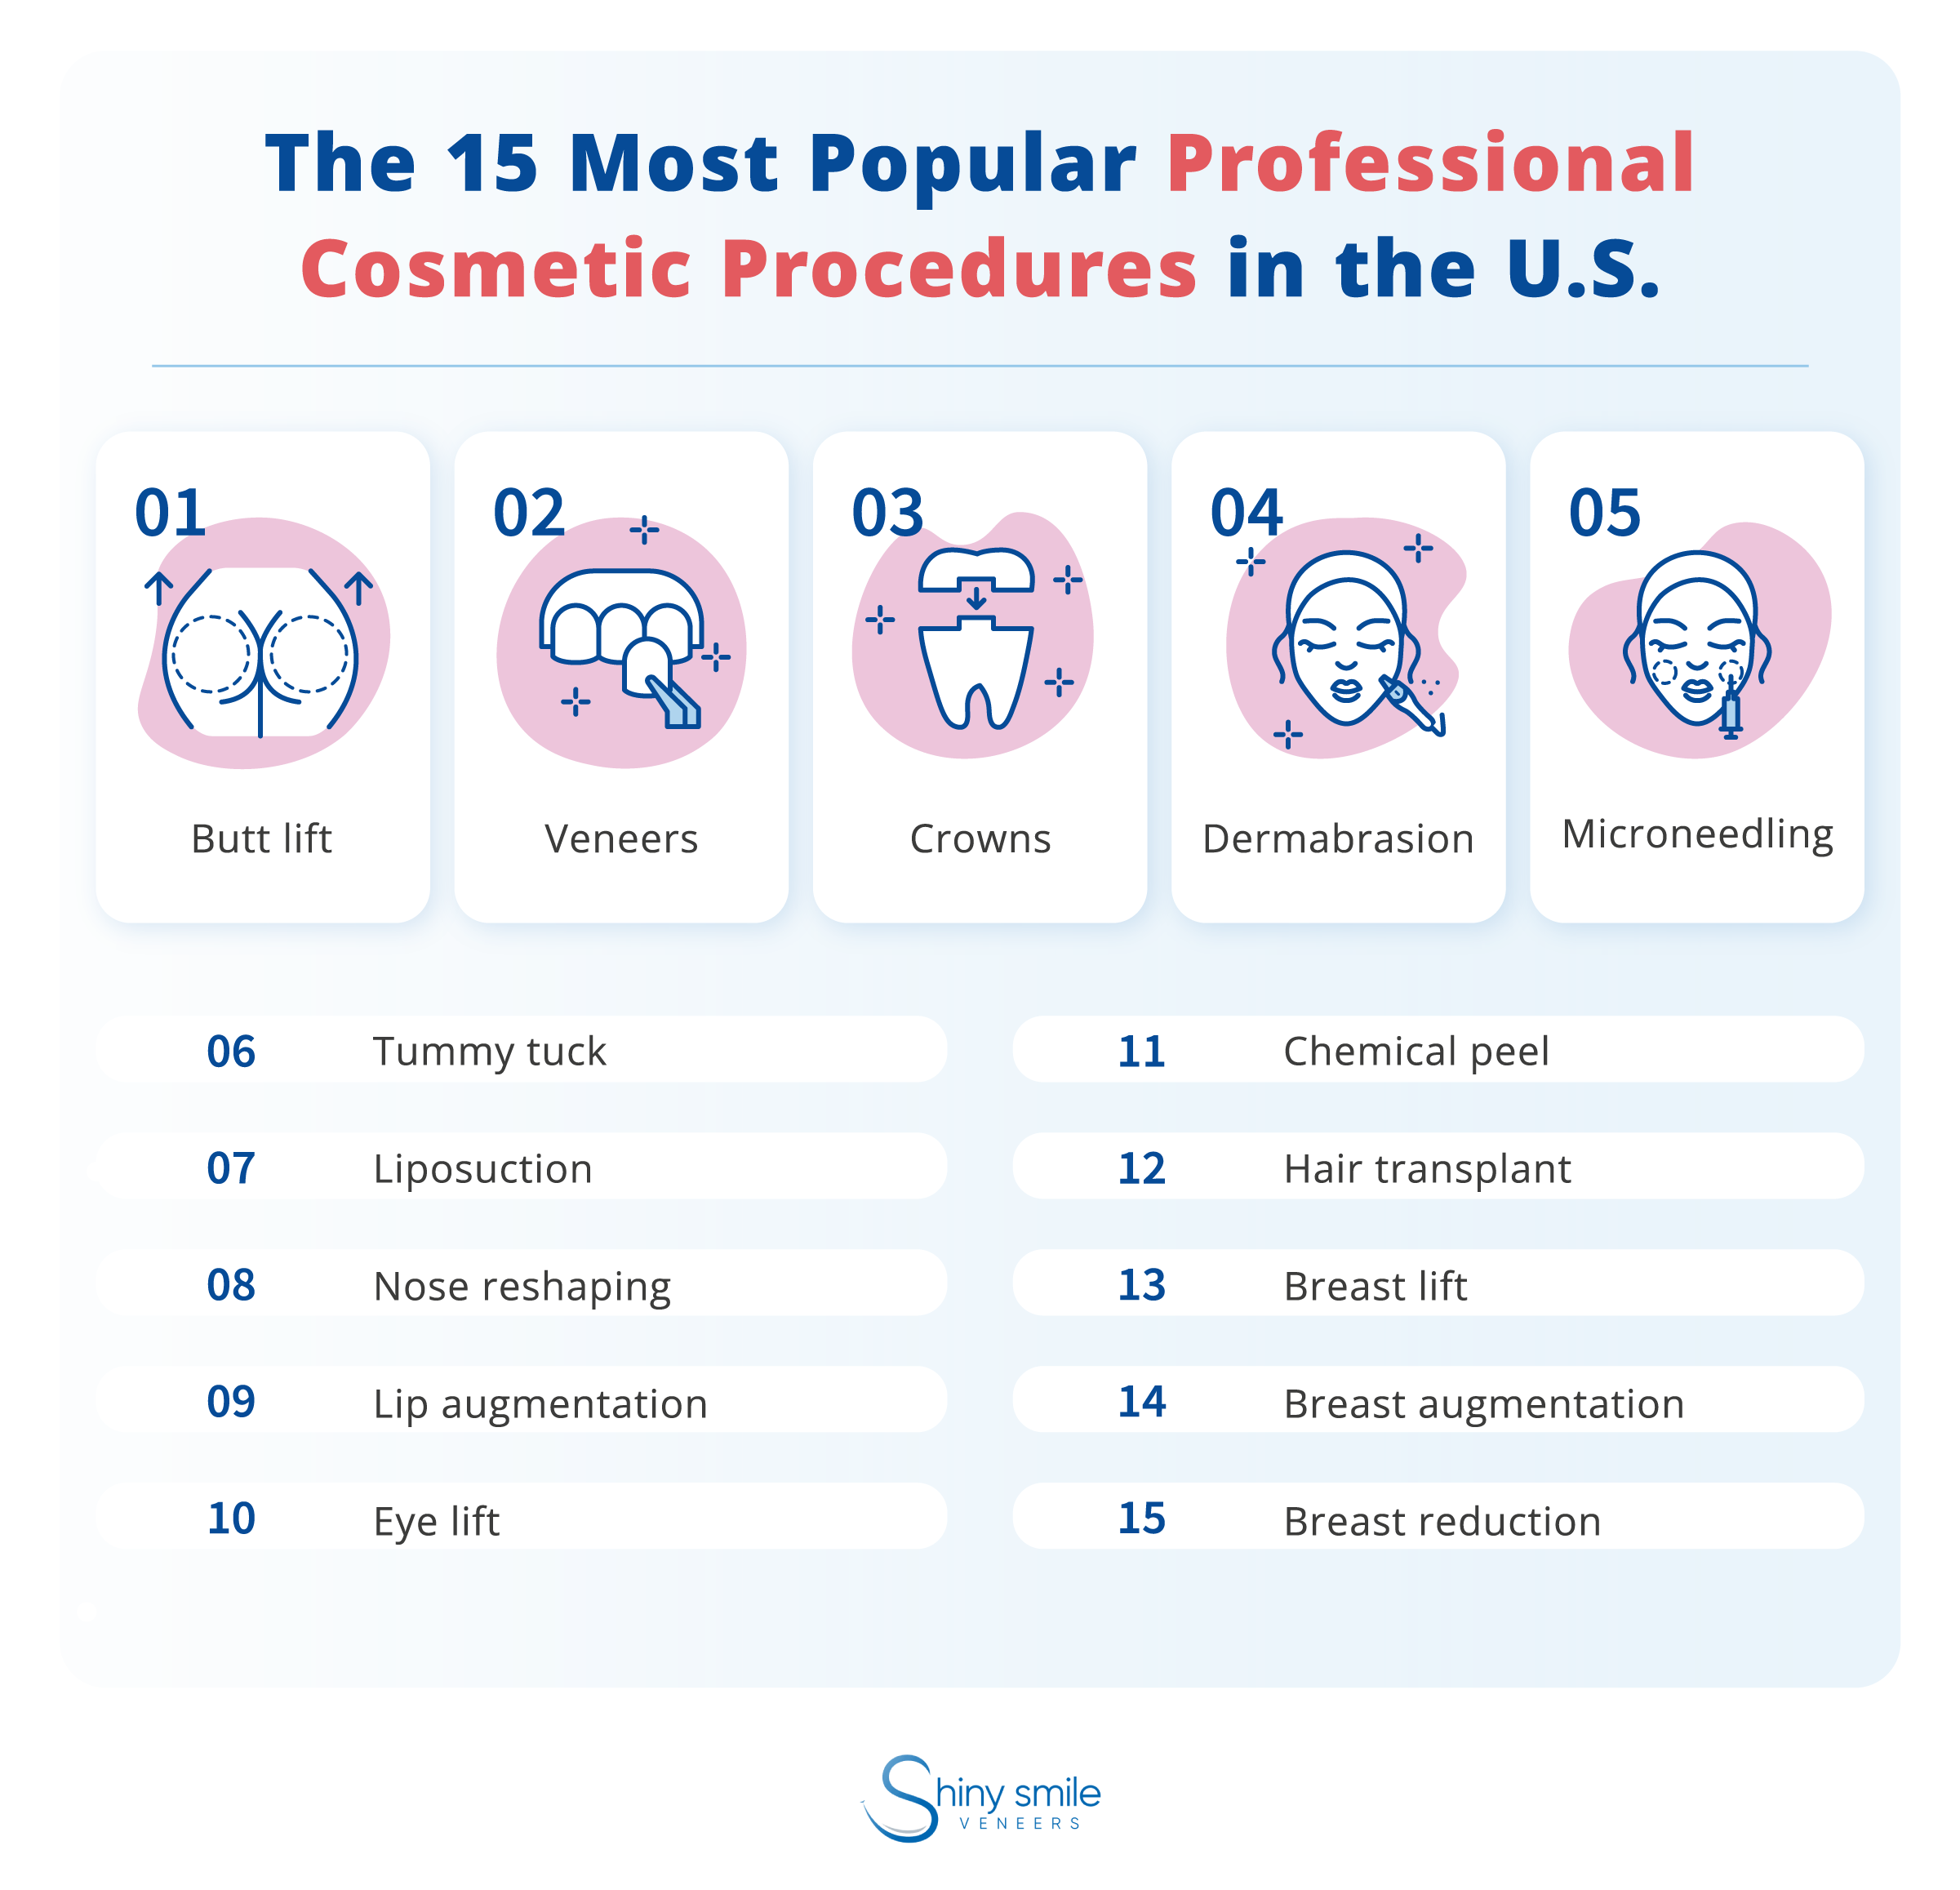 the most popular professional cosmetic procedures in the U.S.